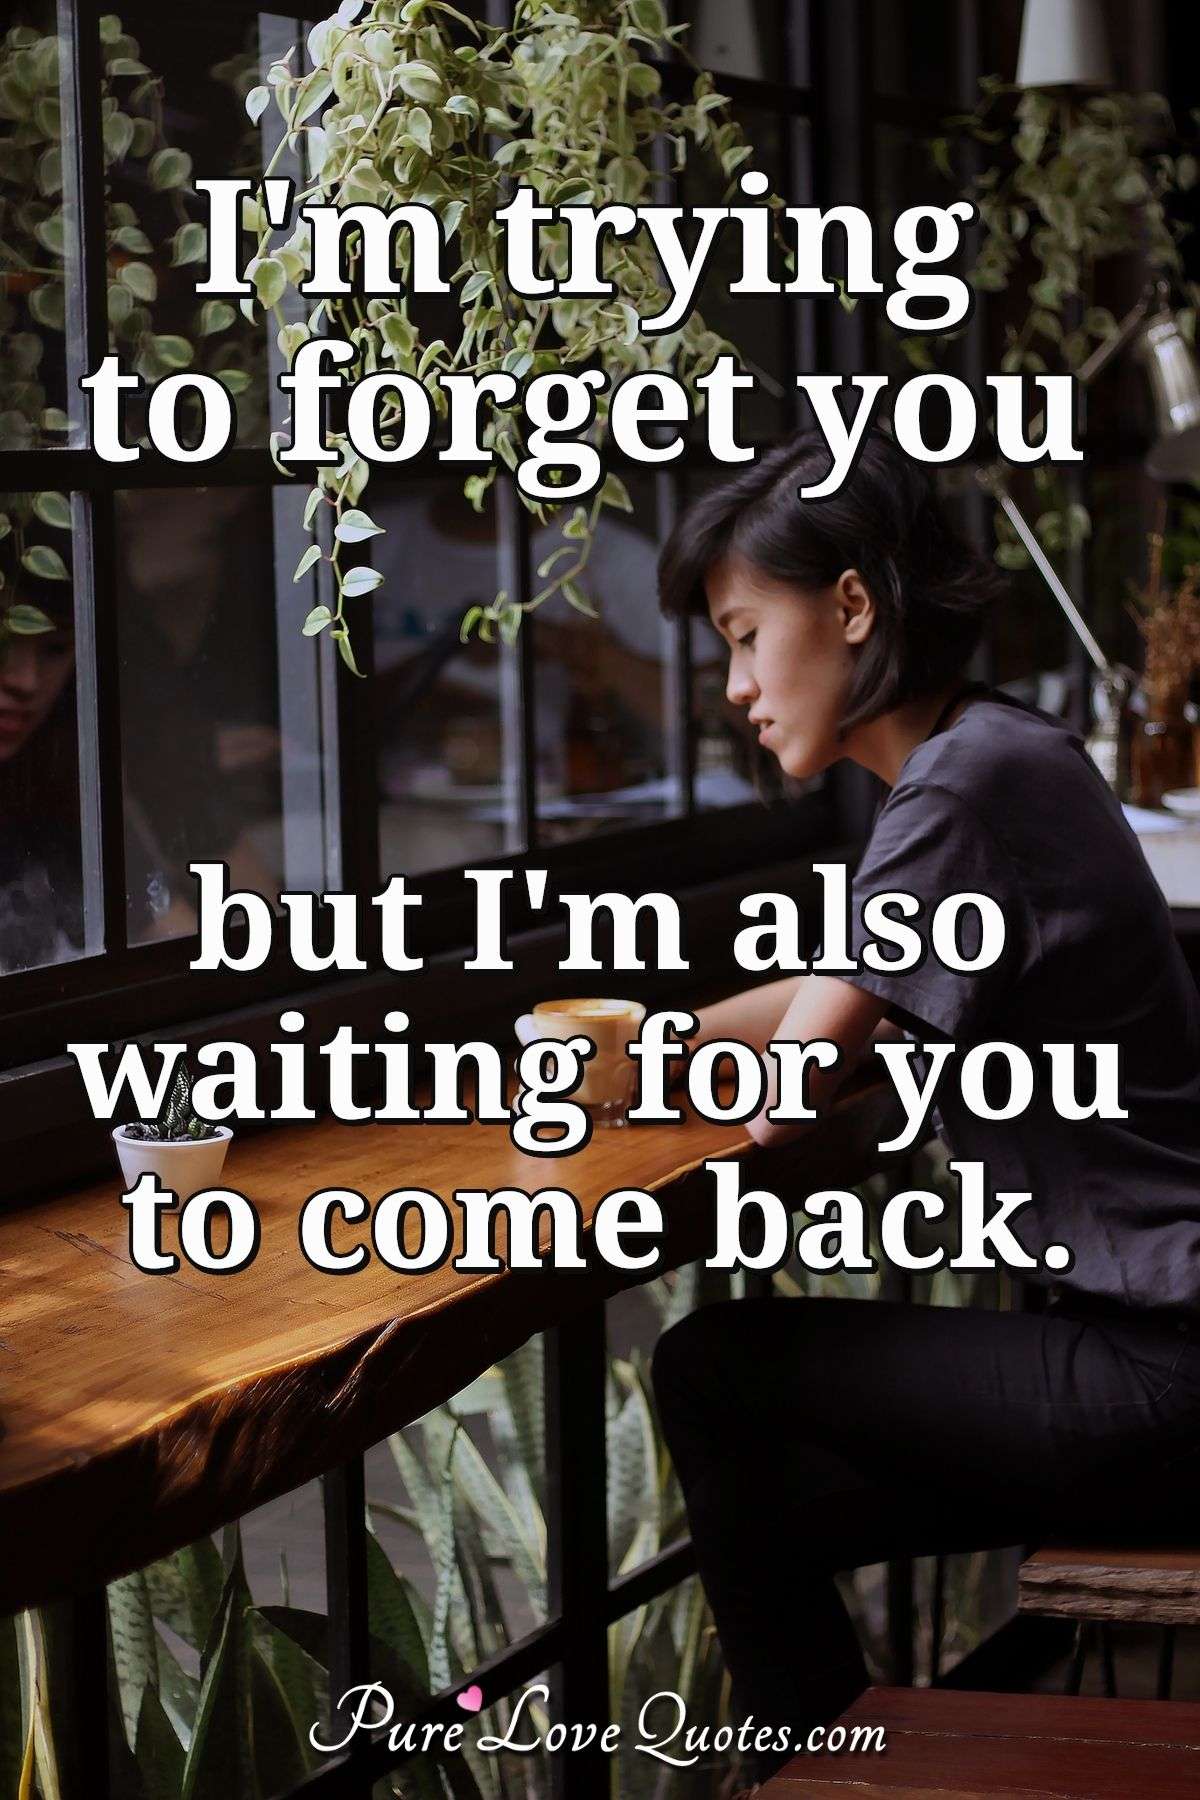 I'm trying to forget you but I'm also waiting for you to come back. - Anonymous